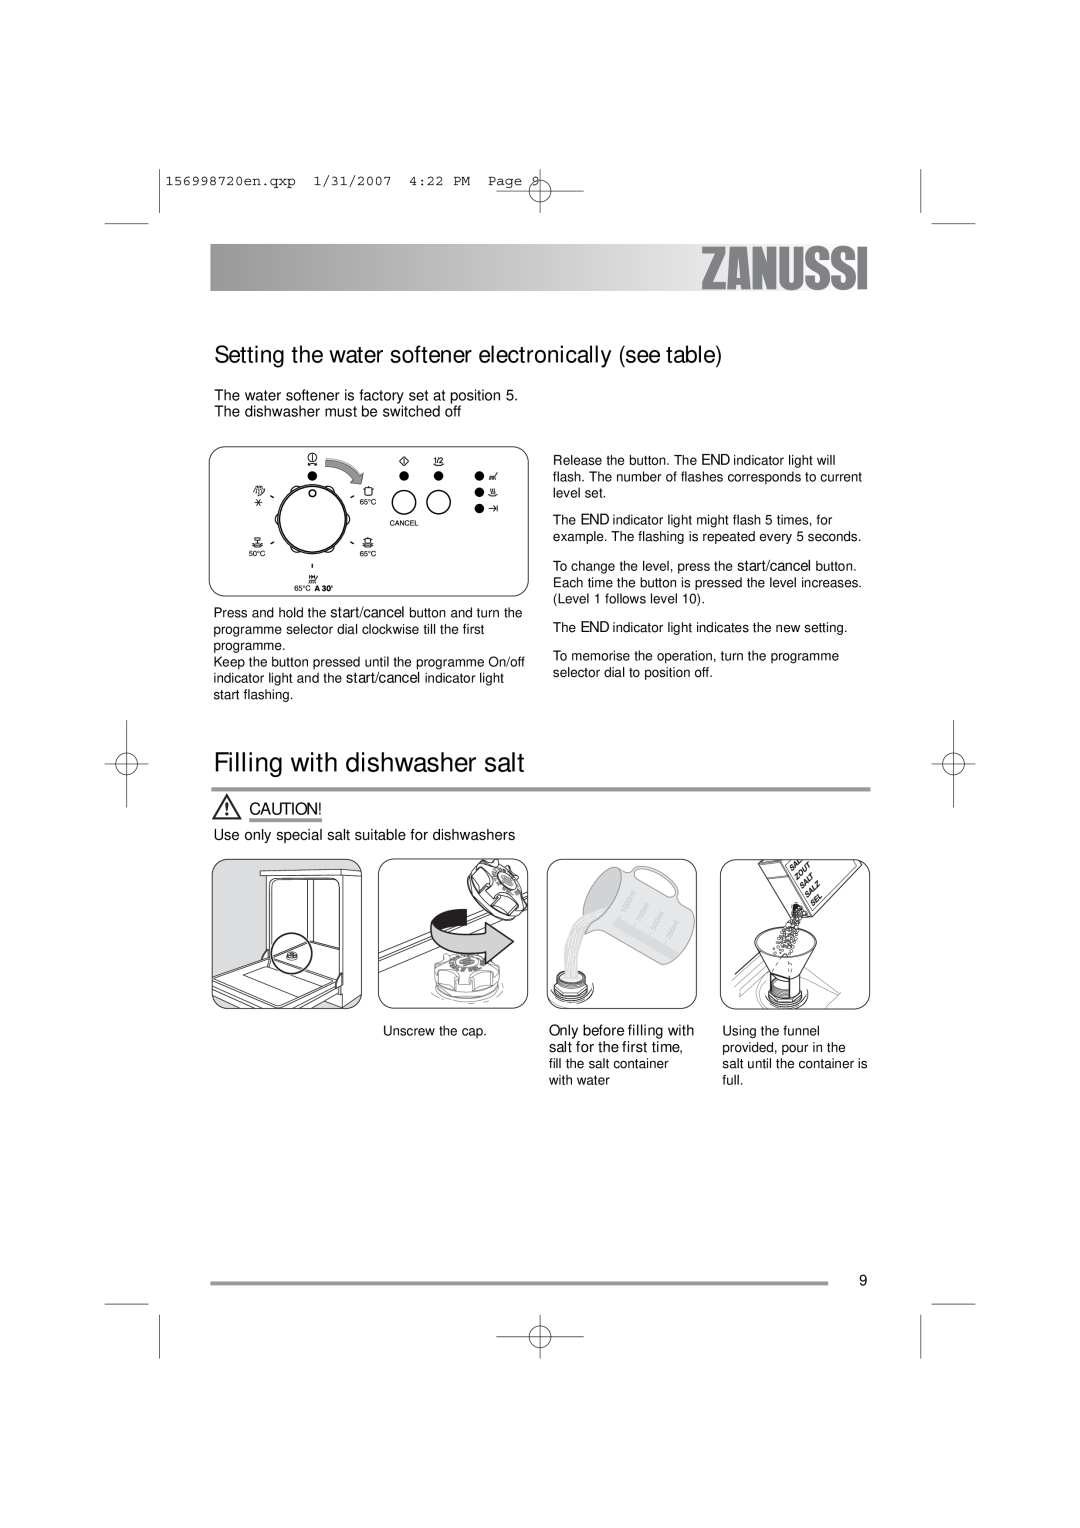 Zanussi ZDI 100 manual Filling with dishwasher salt, Setting the water softener electronically see table 